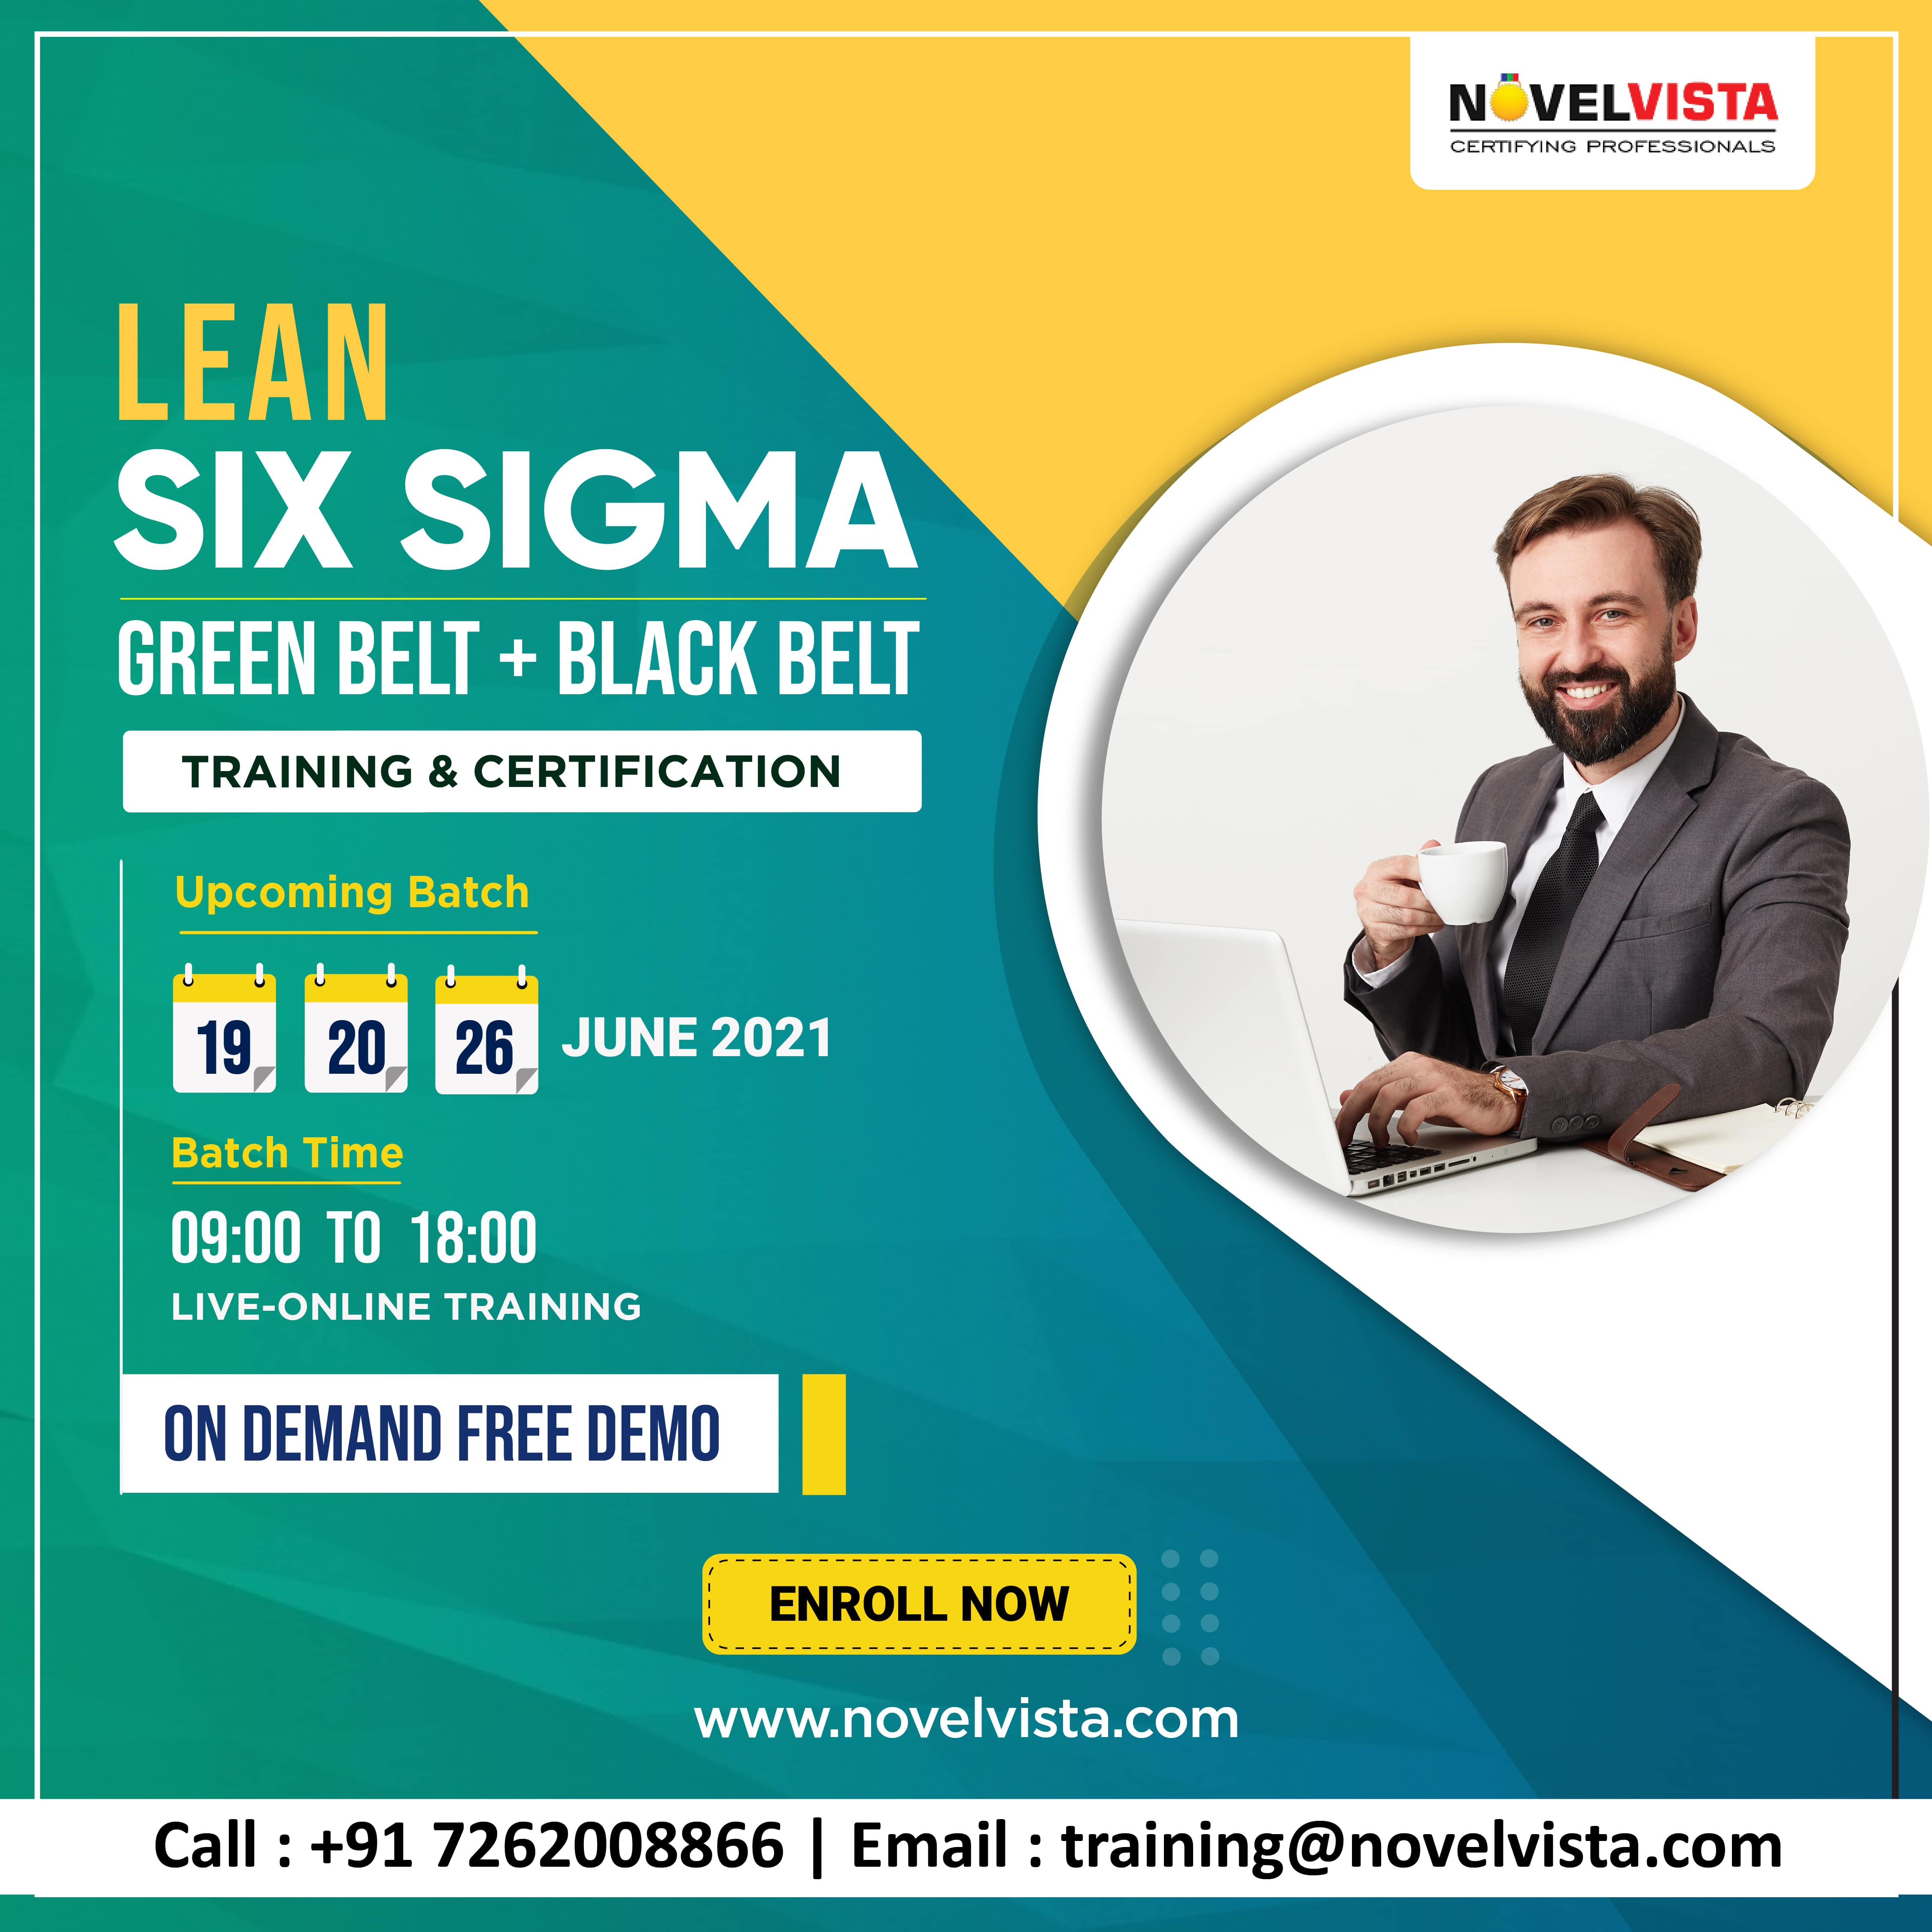 Join Our Lean Six Sigma Green Belt + Black Belt Training and Certification, Chennai, Tamil Nadu, India